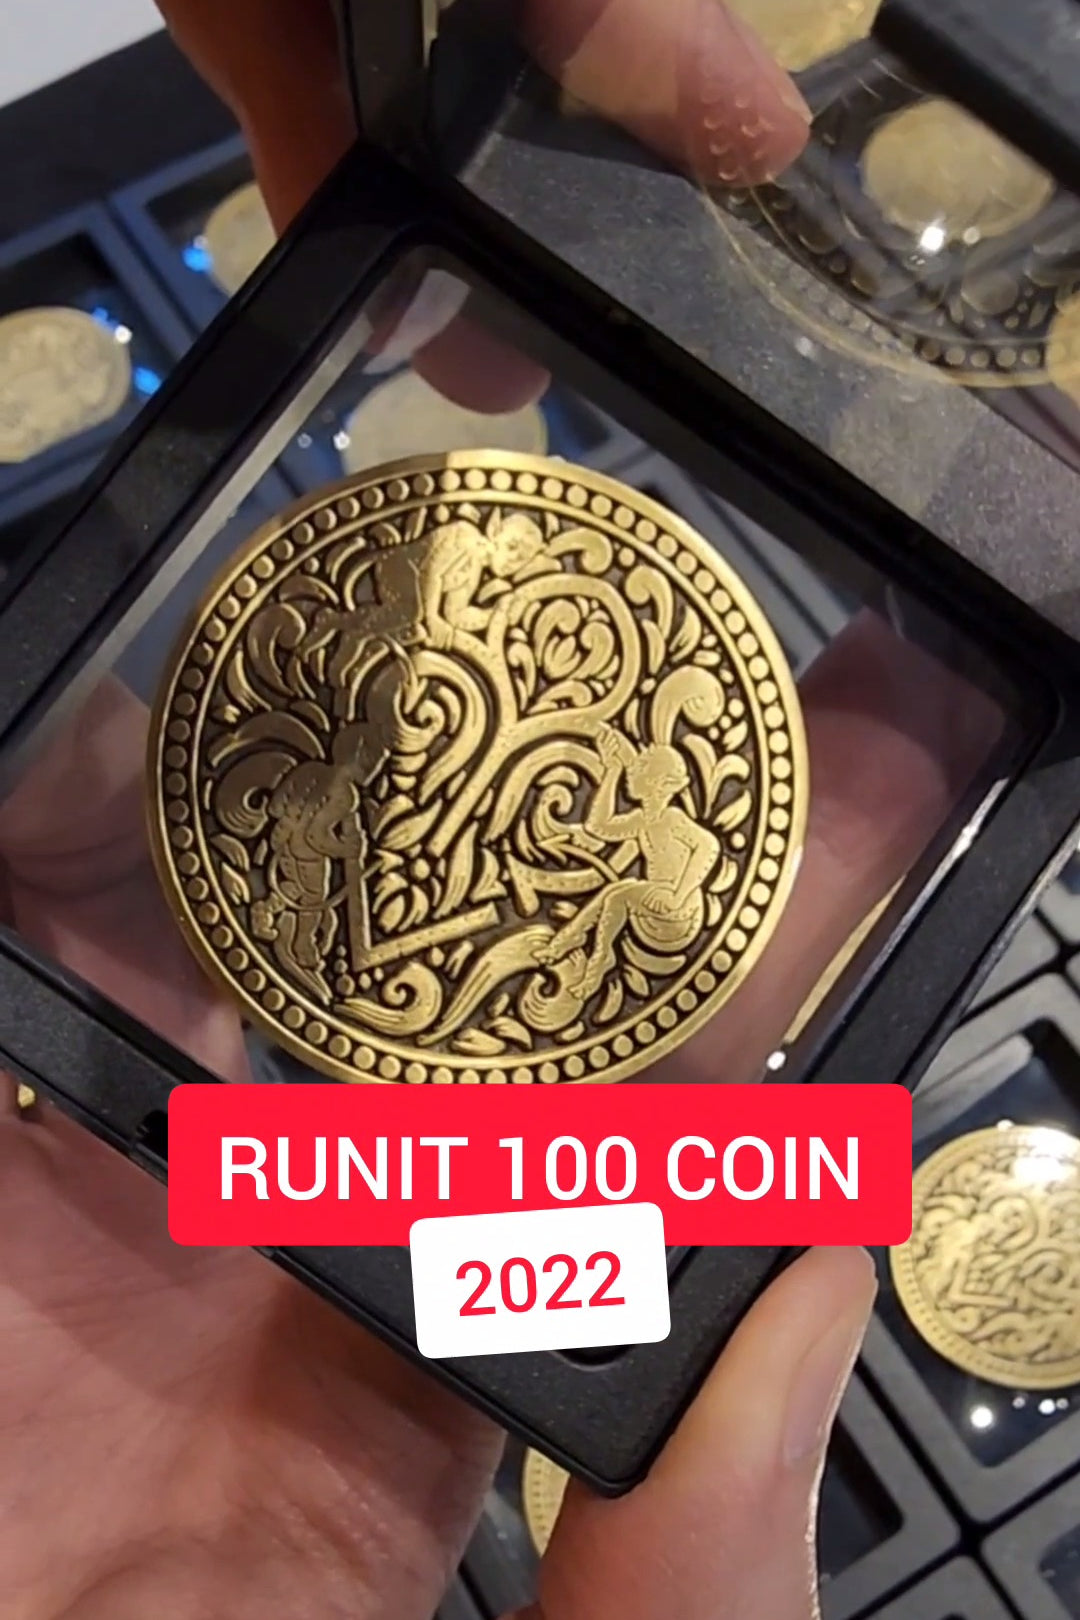 The RunIt 100 Coin 2022 Edition